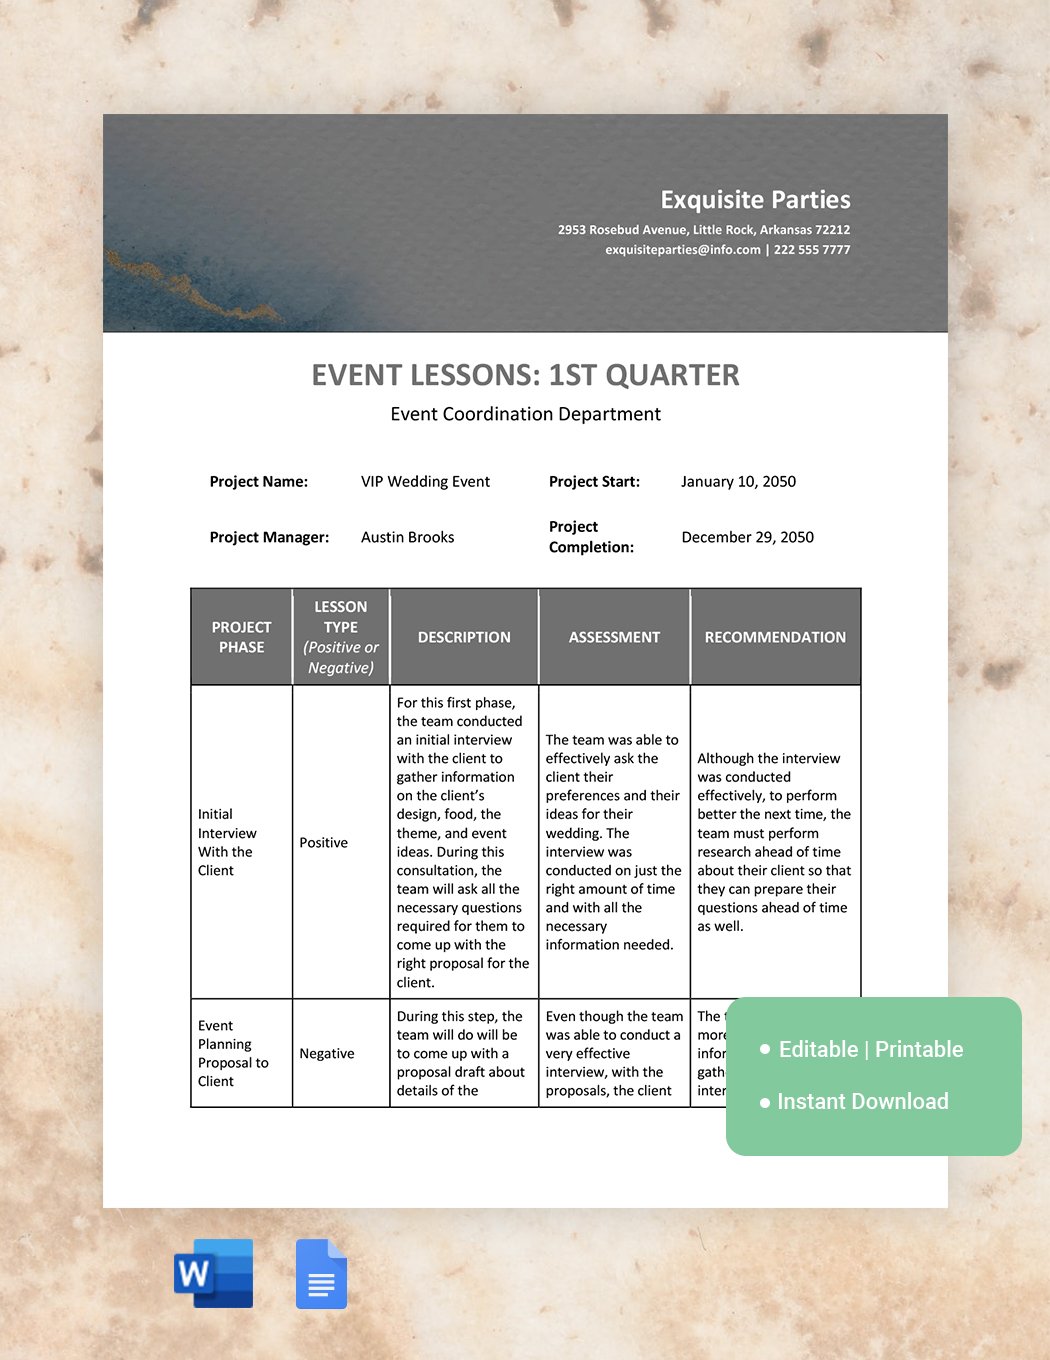 Free Event Lessons Learned Template